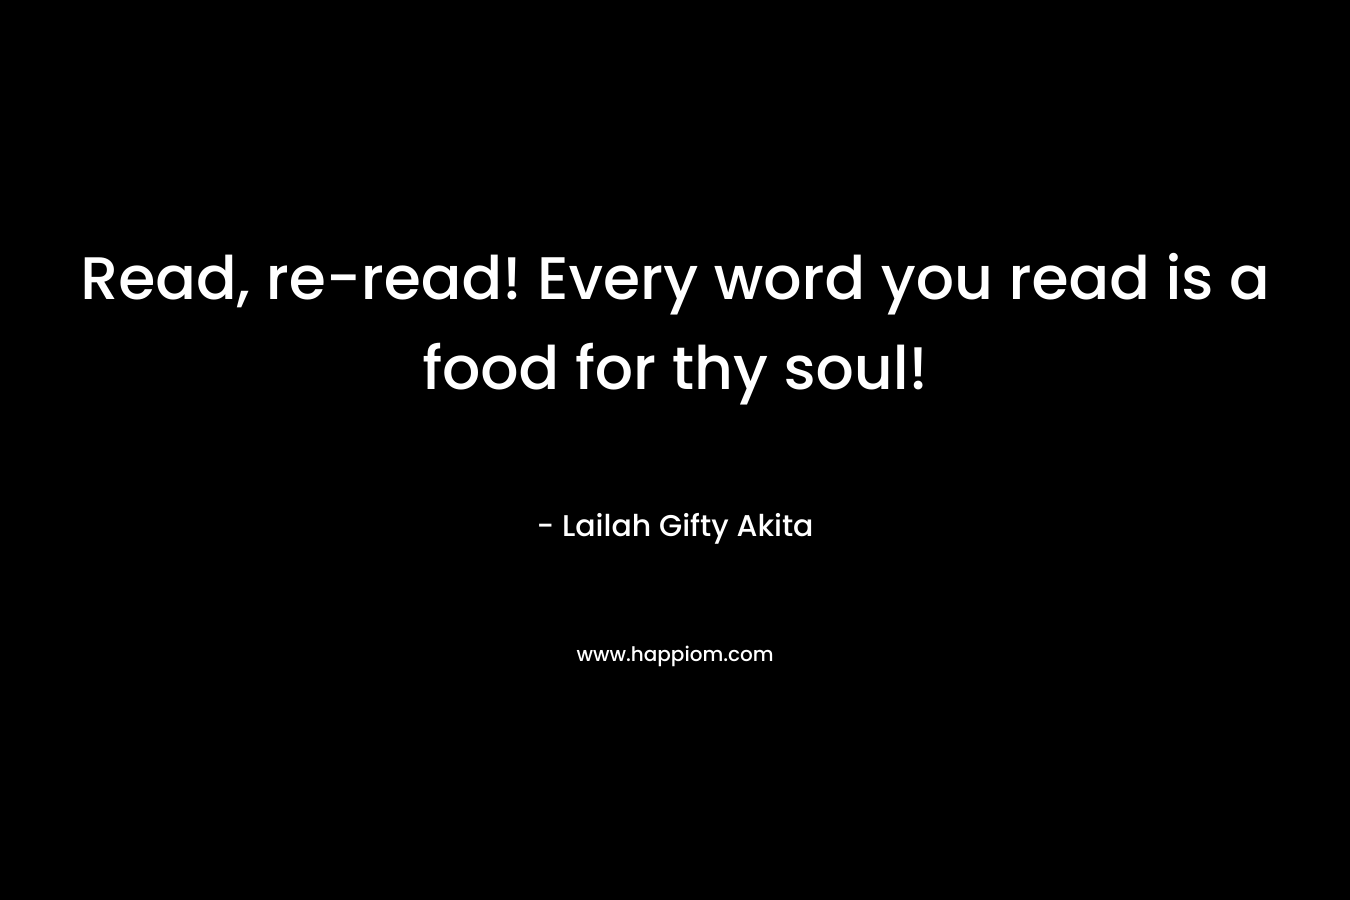 Read, re-read! Every word you read is a food for thy soul!